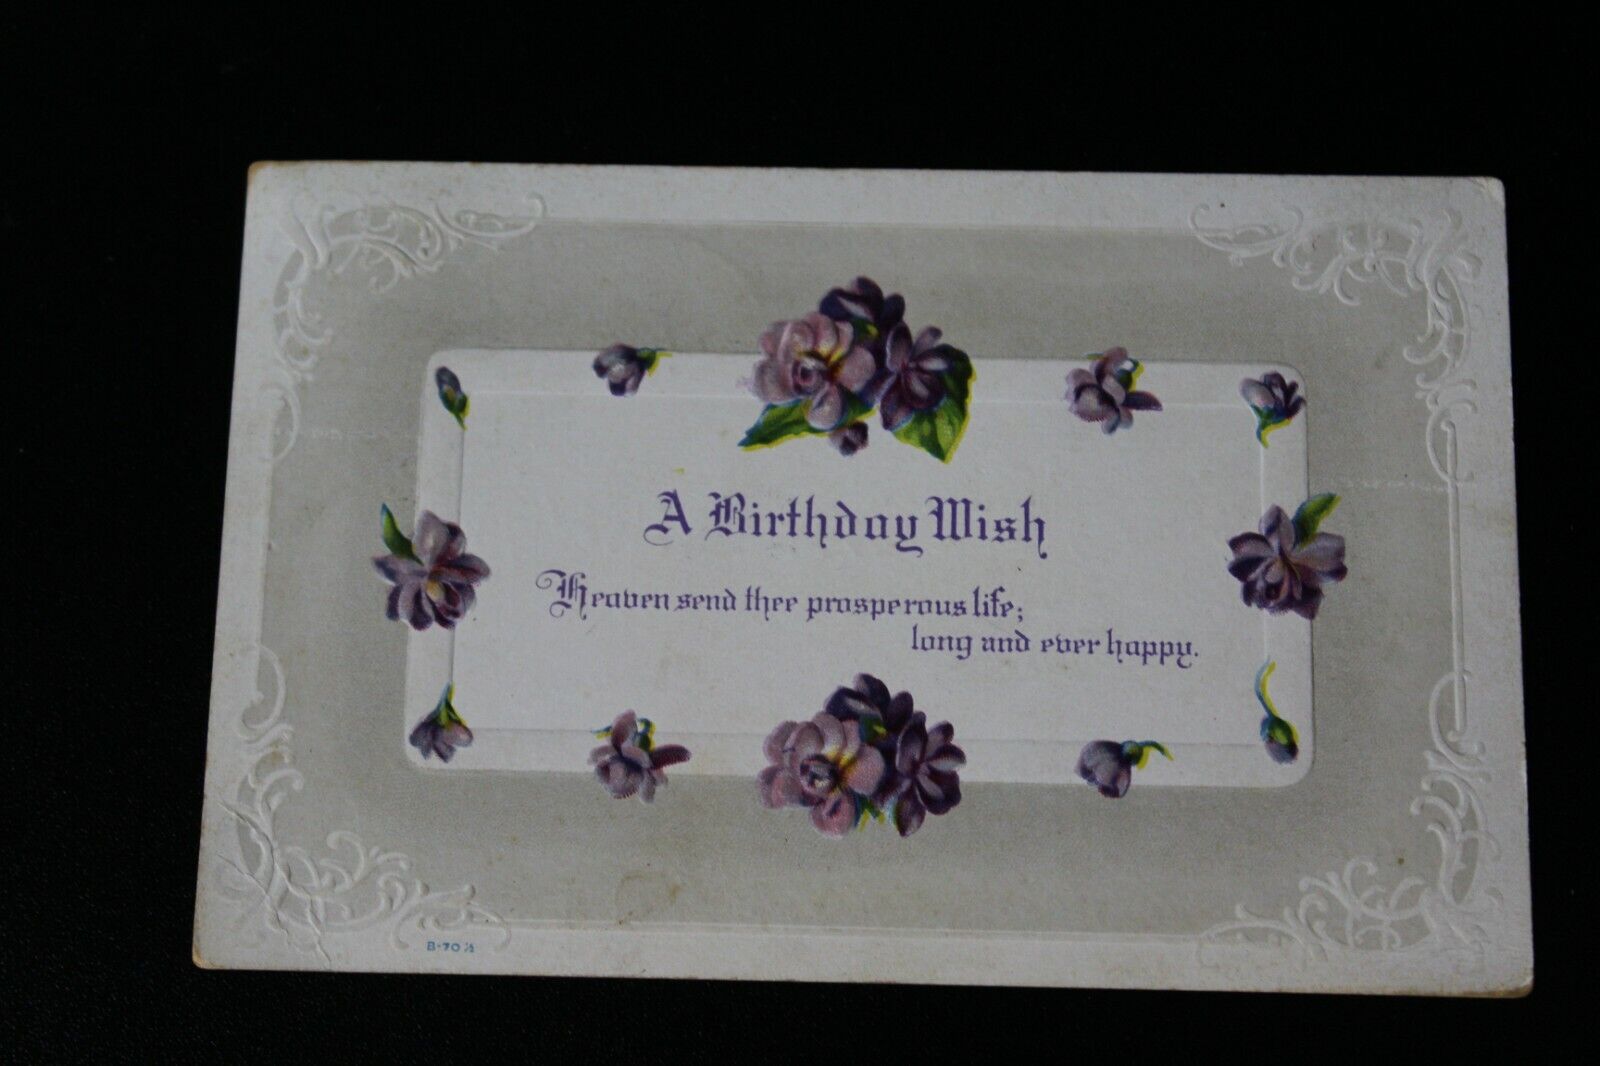 1915 Antique Birthday Wishes Heaven Send Prosperous Life Floral Postcard Rare